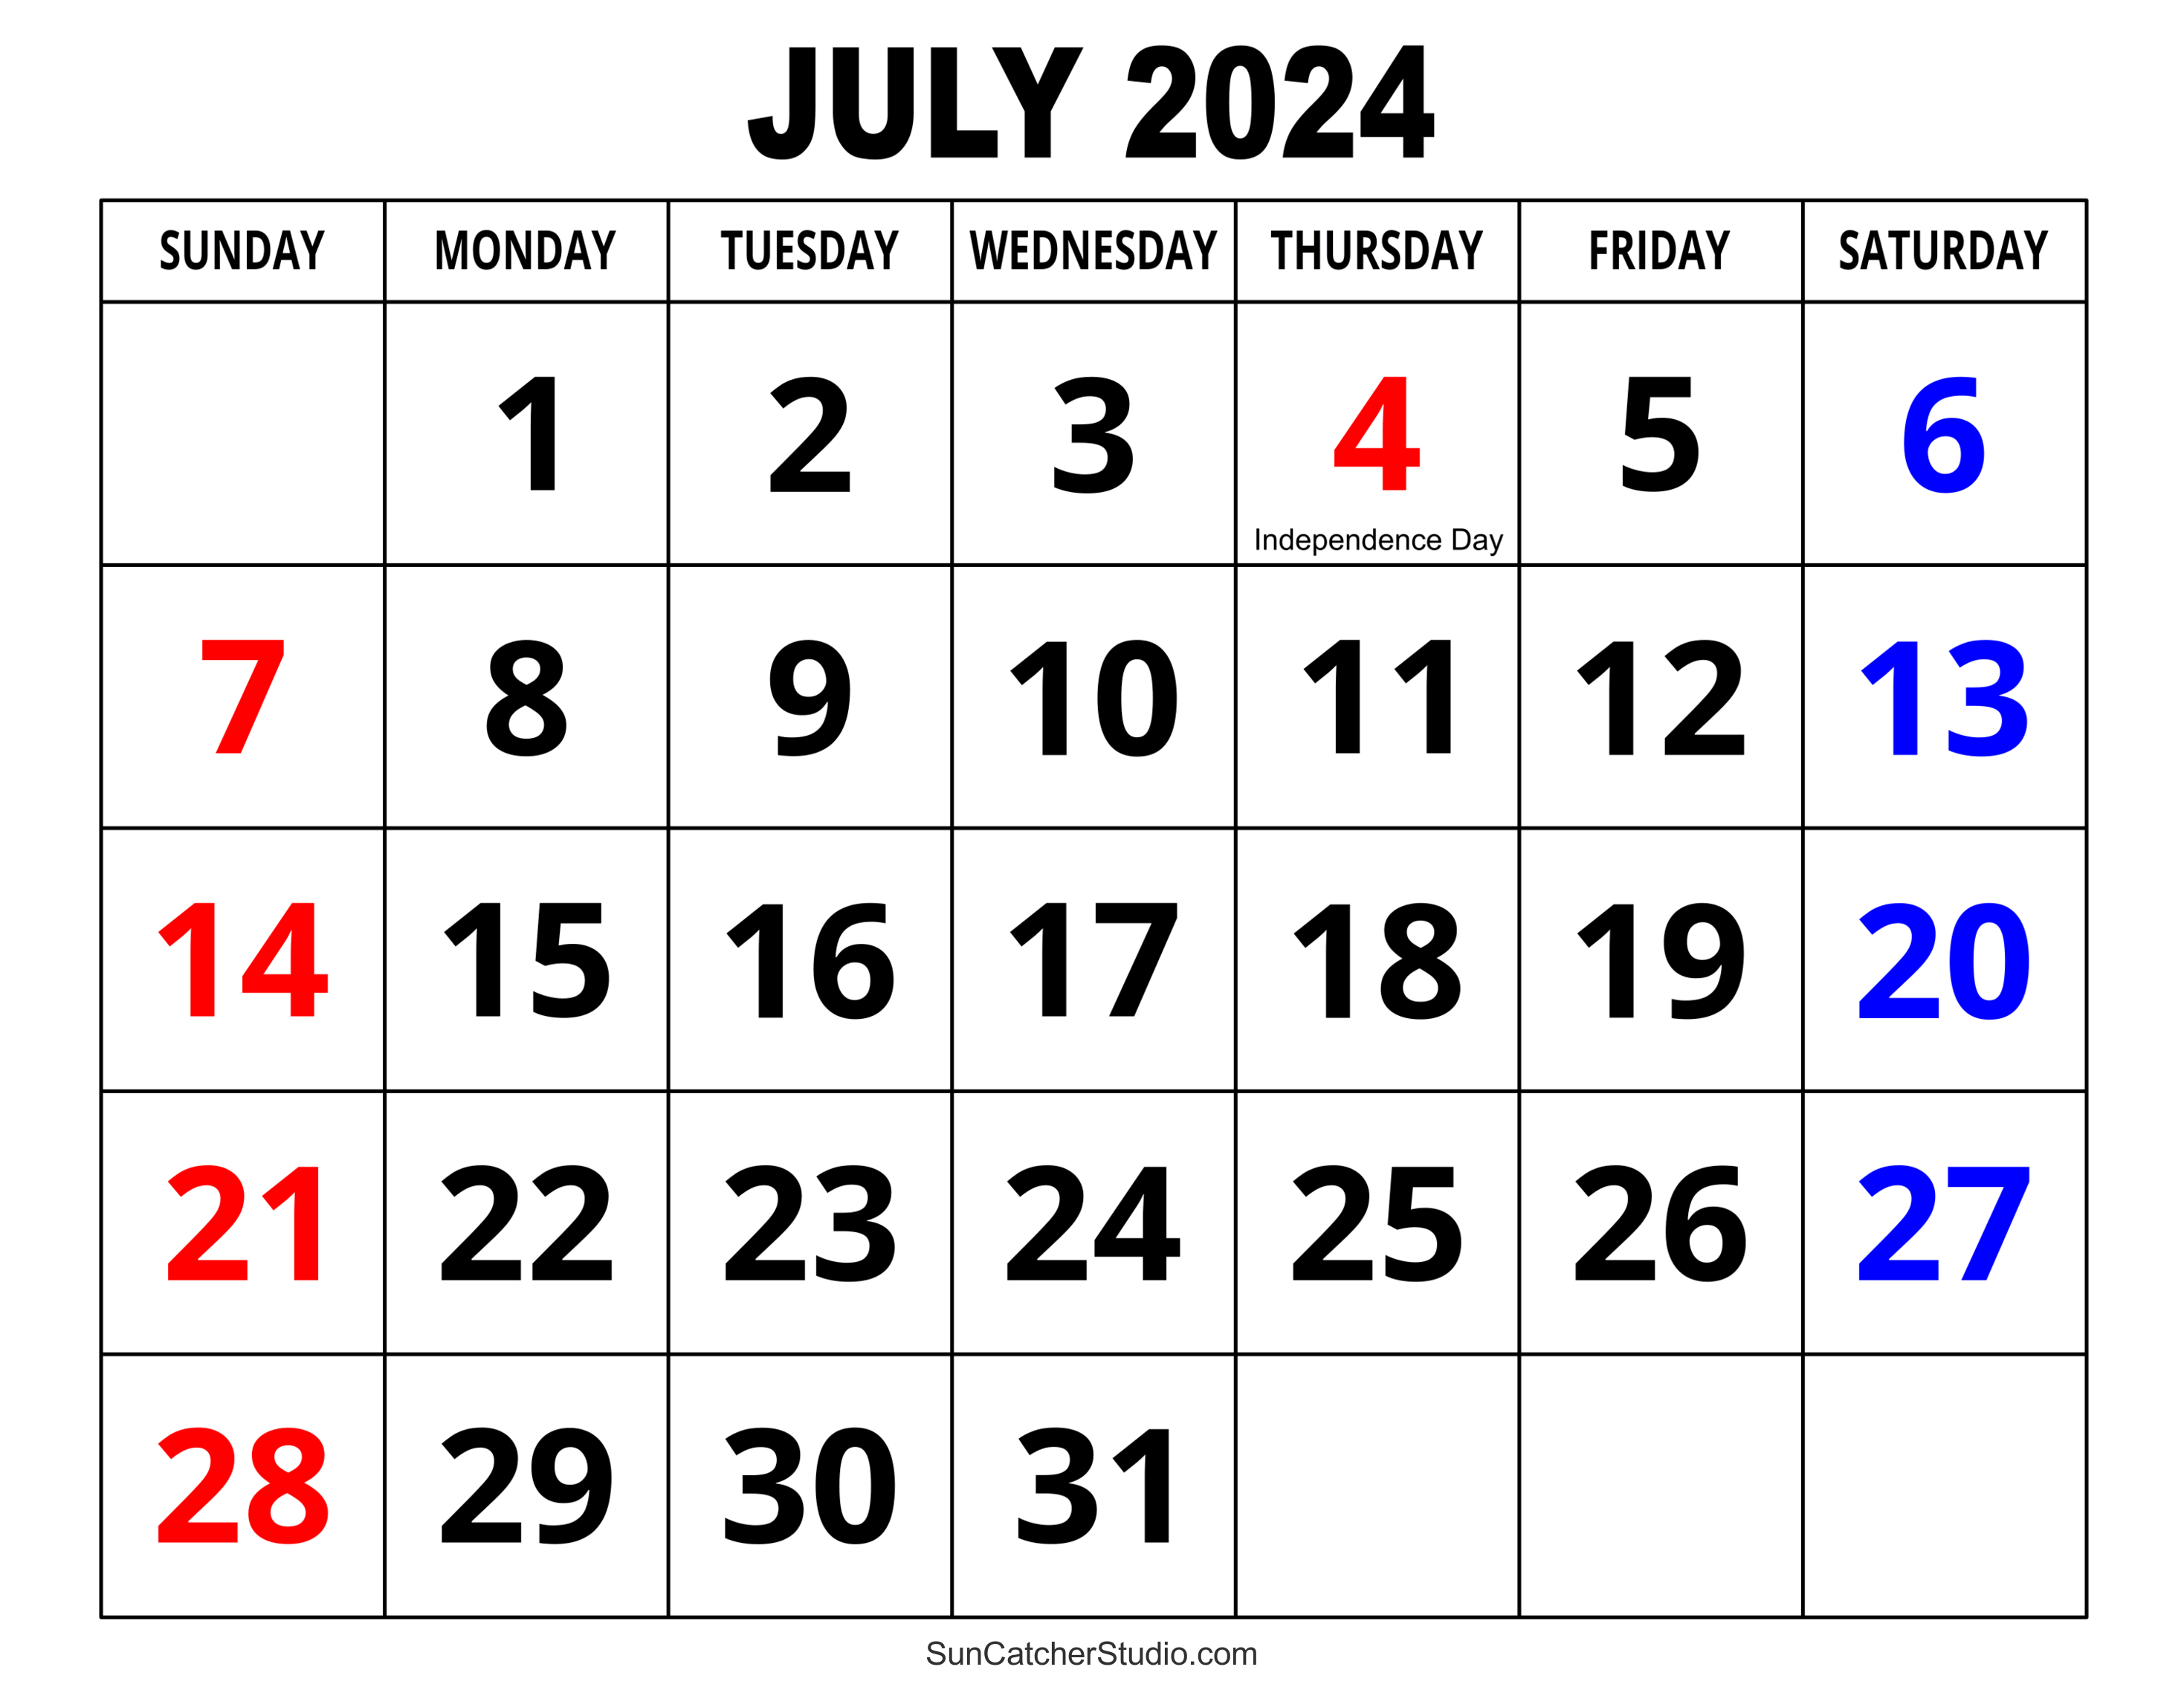 July 2024 Calendar (Free Printable) – Diy Projects, Patterns within July 30 2024 Calendar